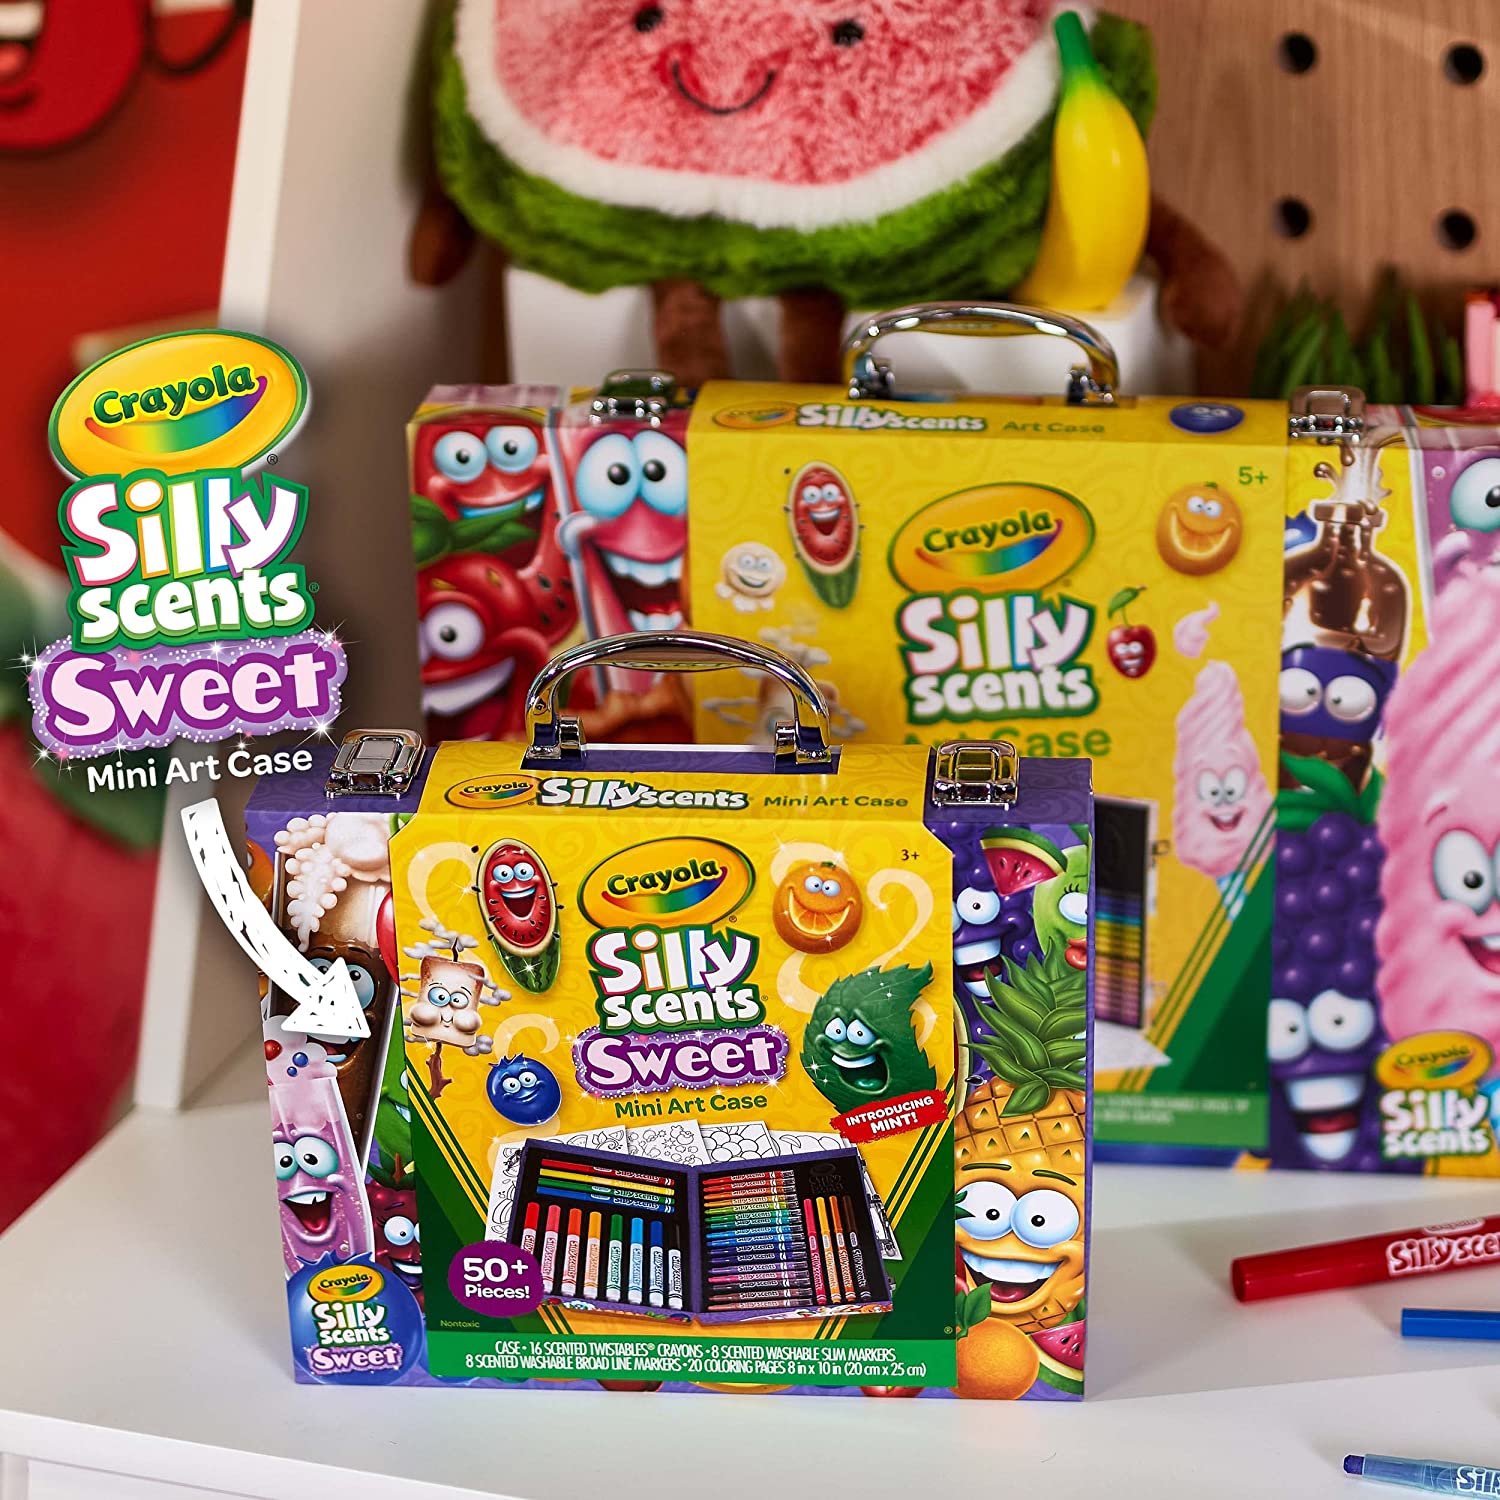 https://bigbigmart.com/wp-content/uploads/2023/02/Crayola-Silly-Scents-Mini-Inspiration-Art-Case-Coloring-Set-Gift-for-Kids-Ages-3-4-5-65.jpg